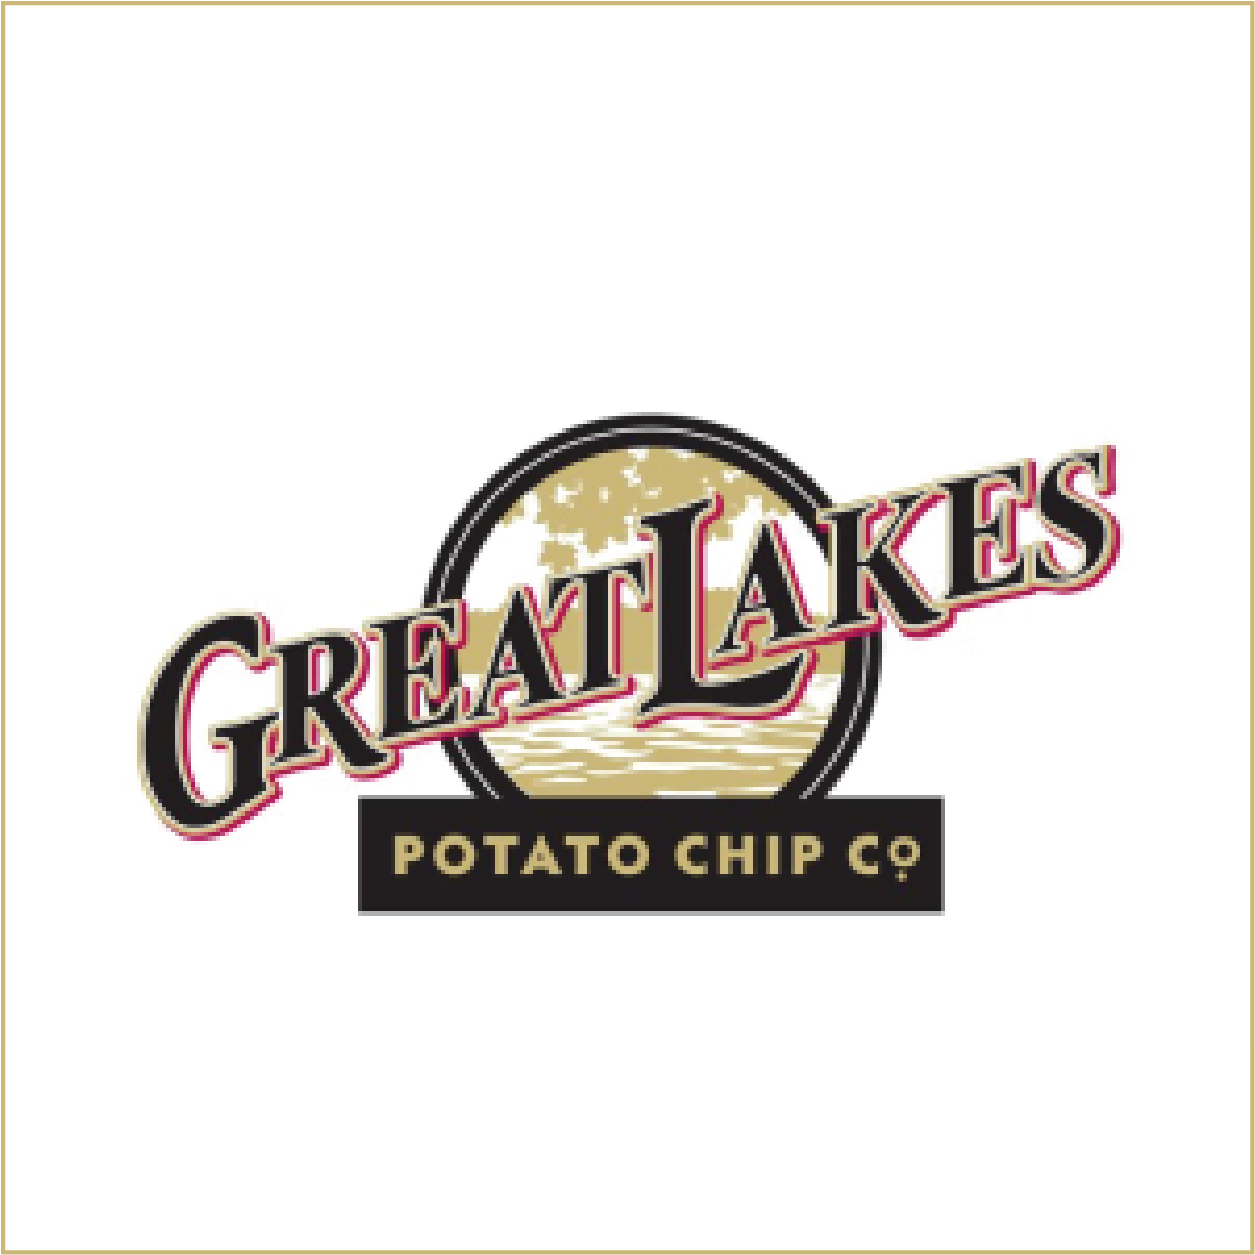 Great Lakes Potoato Chips